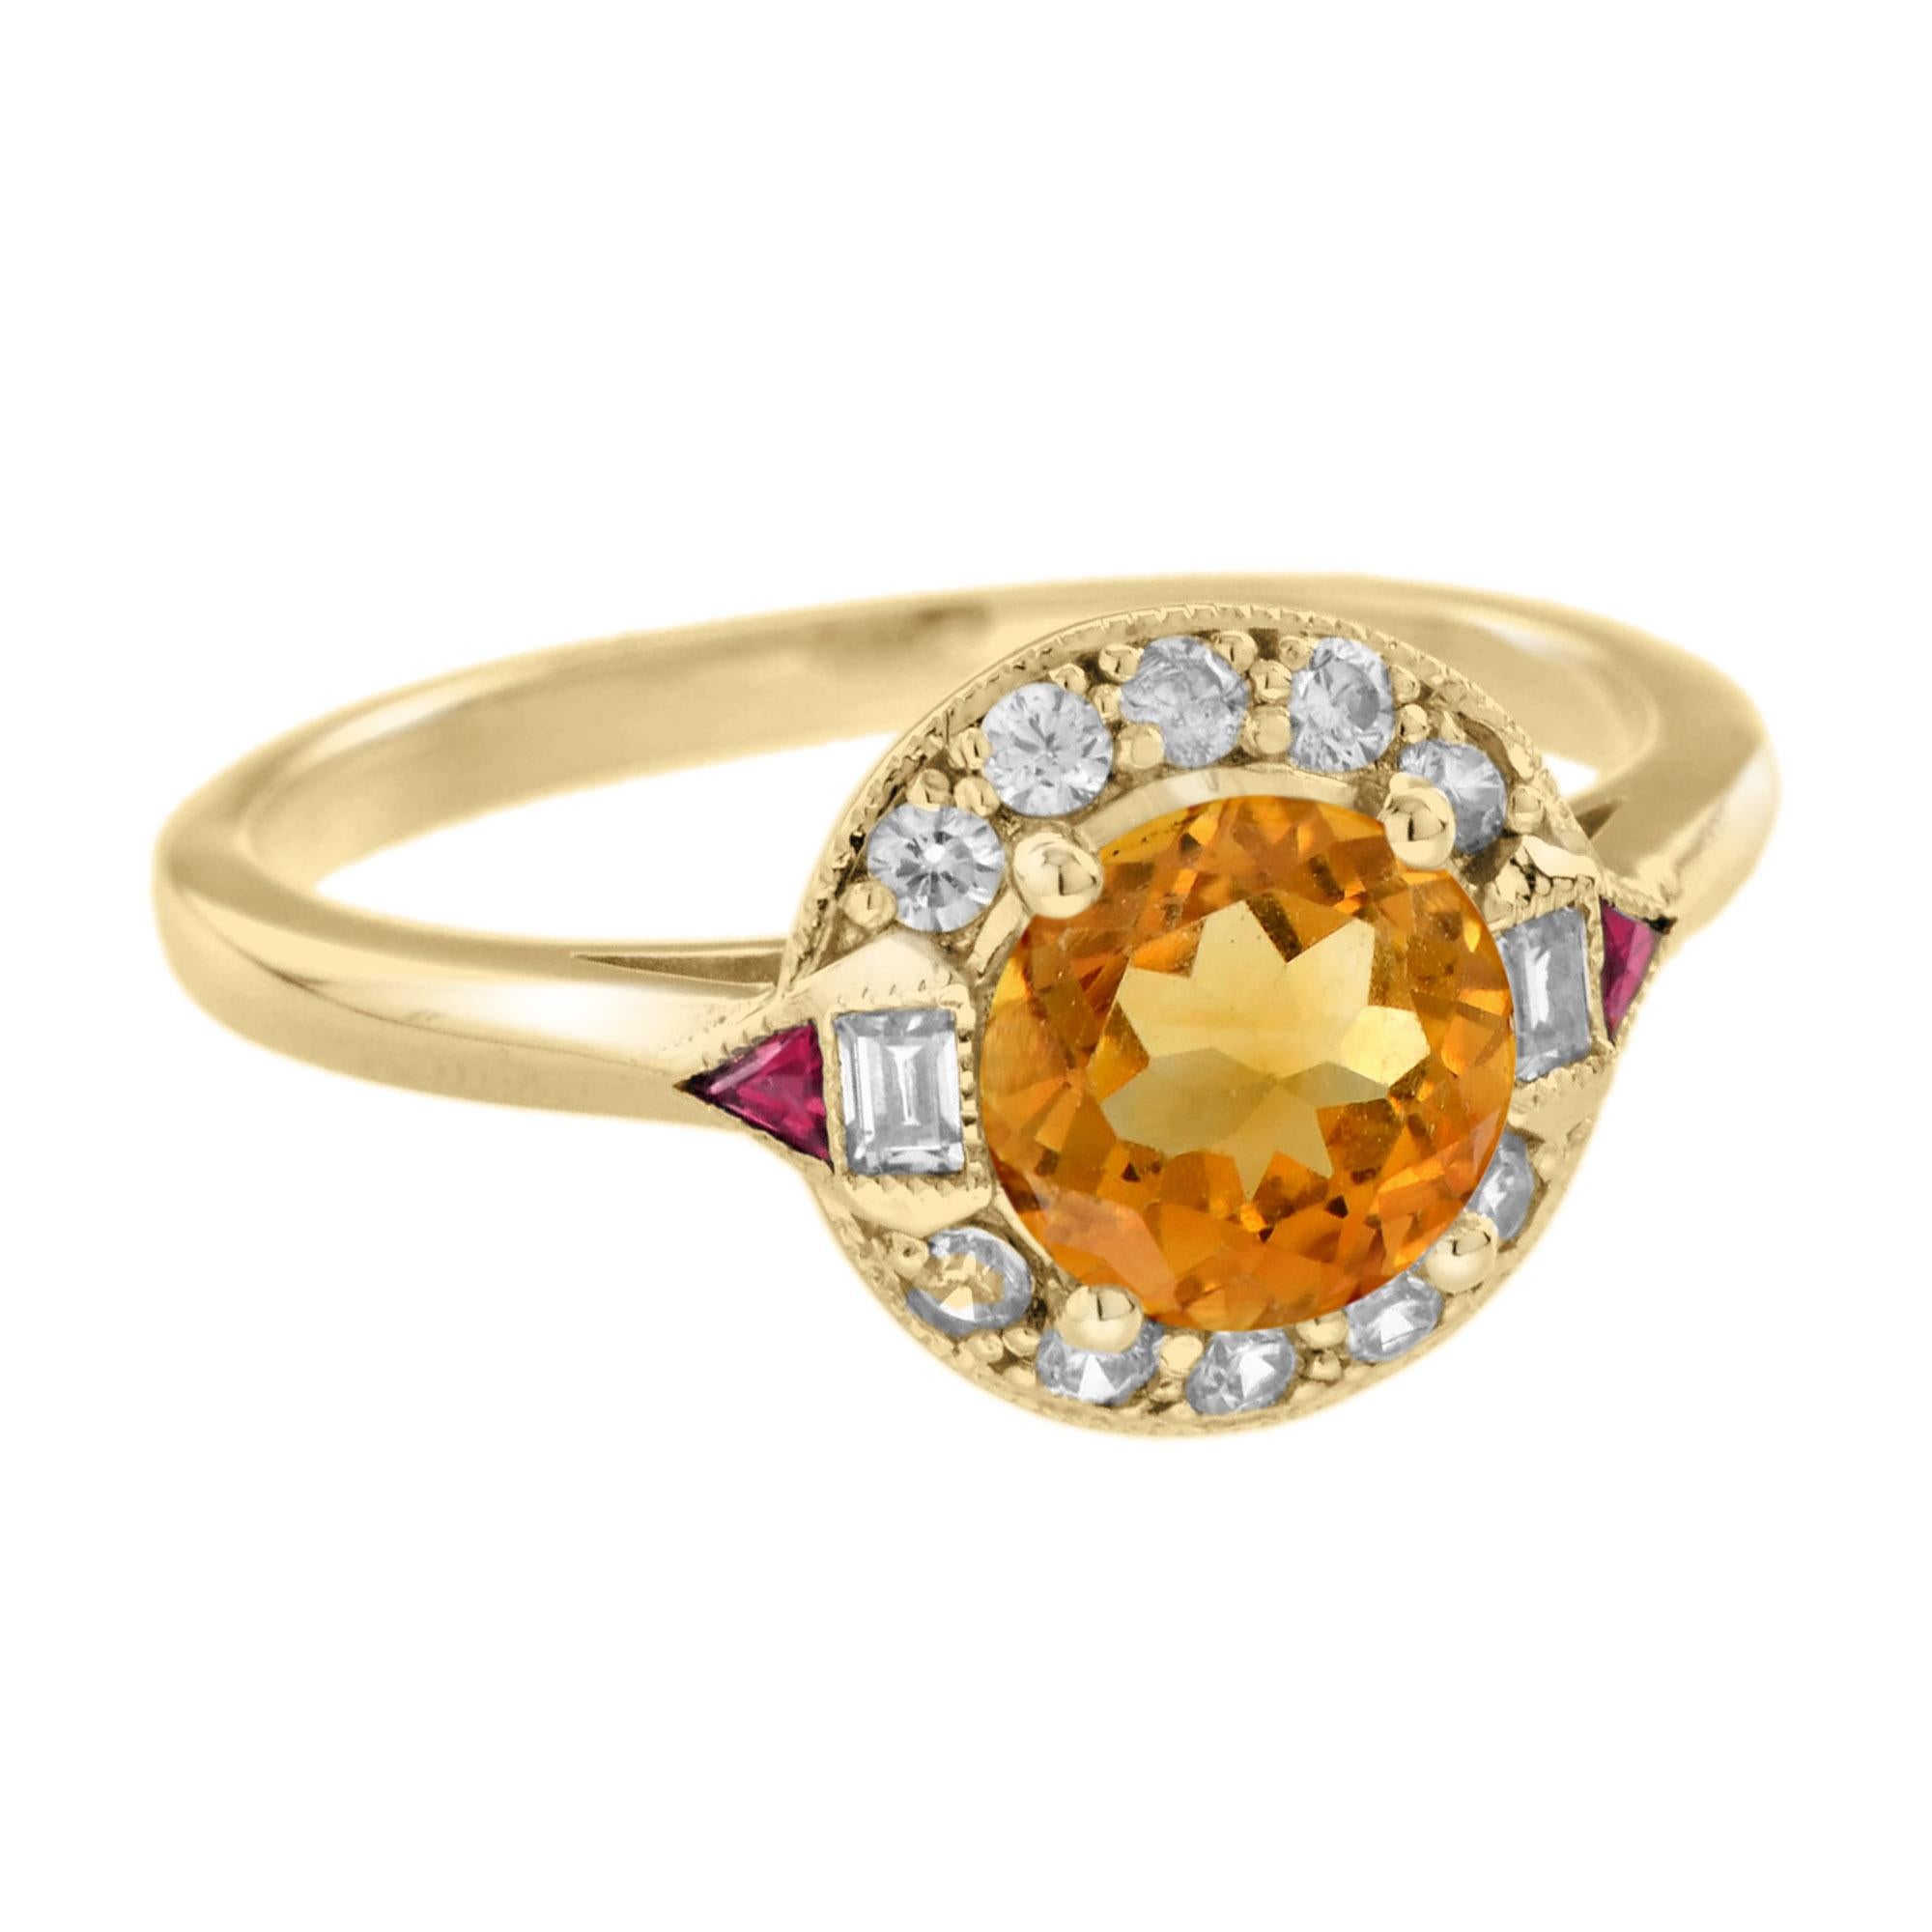 An enchanting gemstone meets a classic mounting in this distinctively gorgeous Art Deco style jewel. The round honey-colored citrine is framed by round diamonds. The shoulders features French cut triangle shaped rubies – just stunning!

Ring